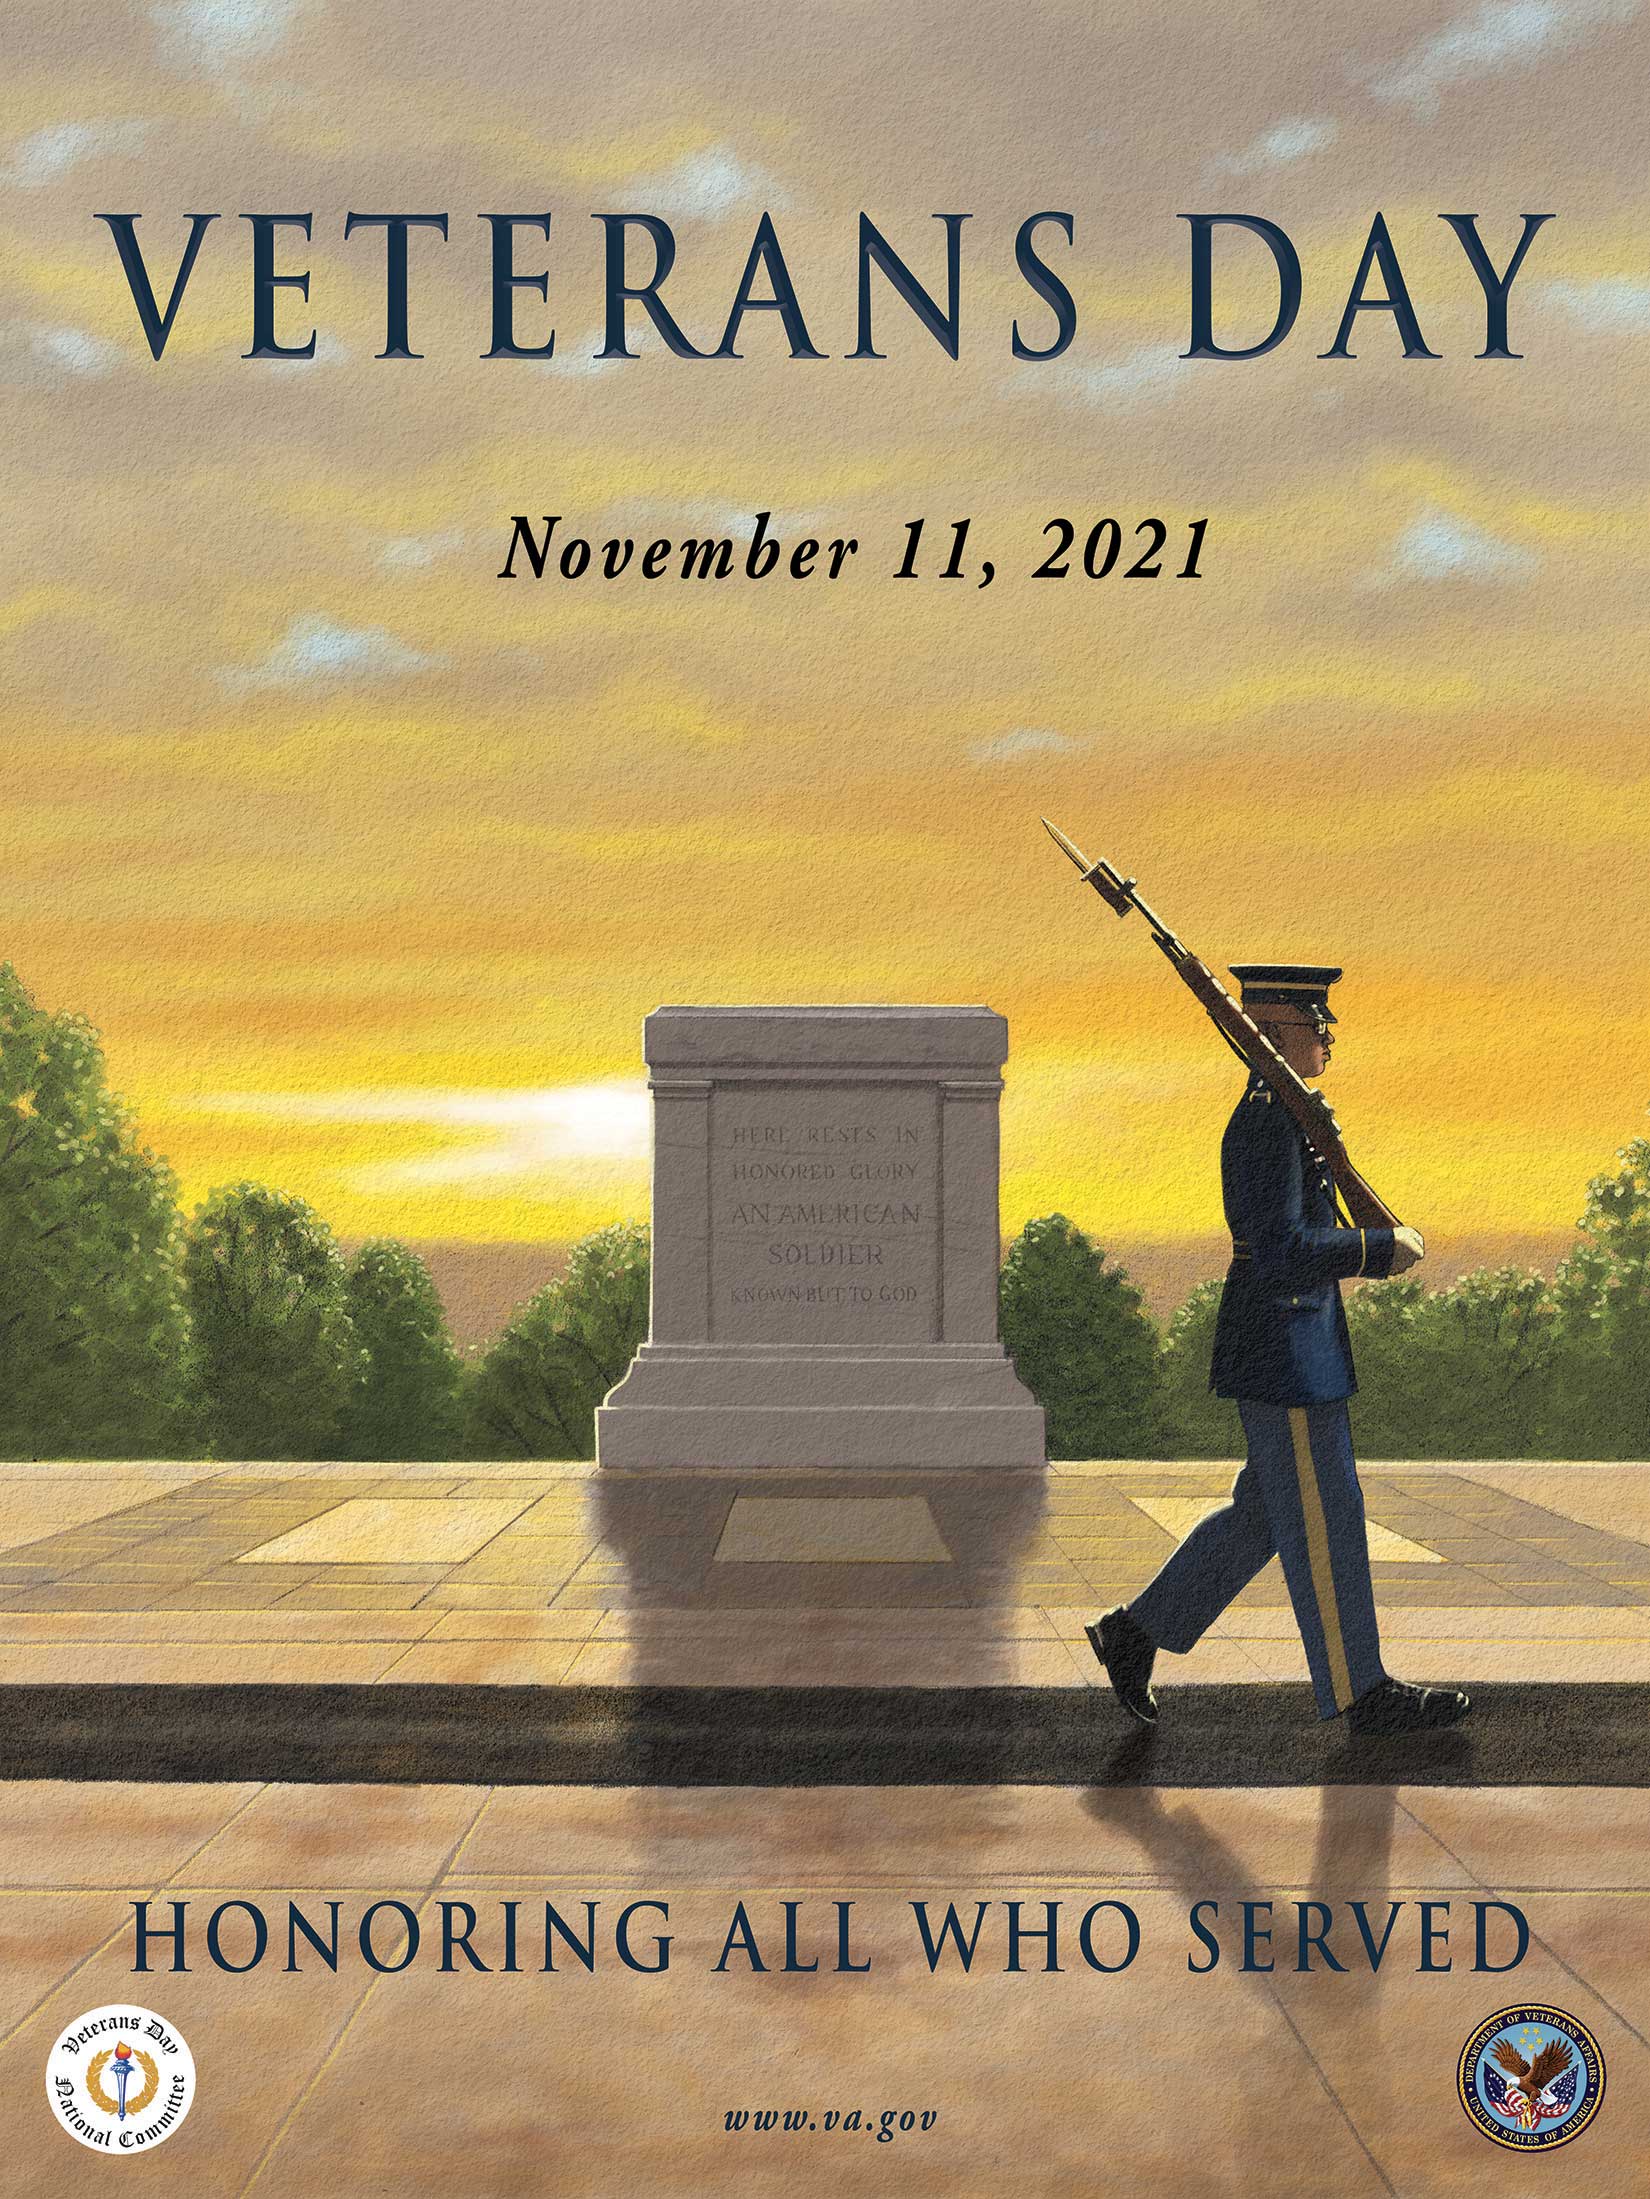 2021 Veterans Day Free Meals and Storewide Deals